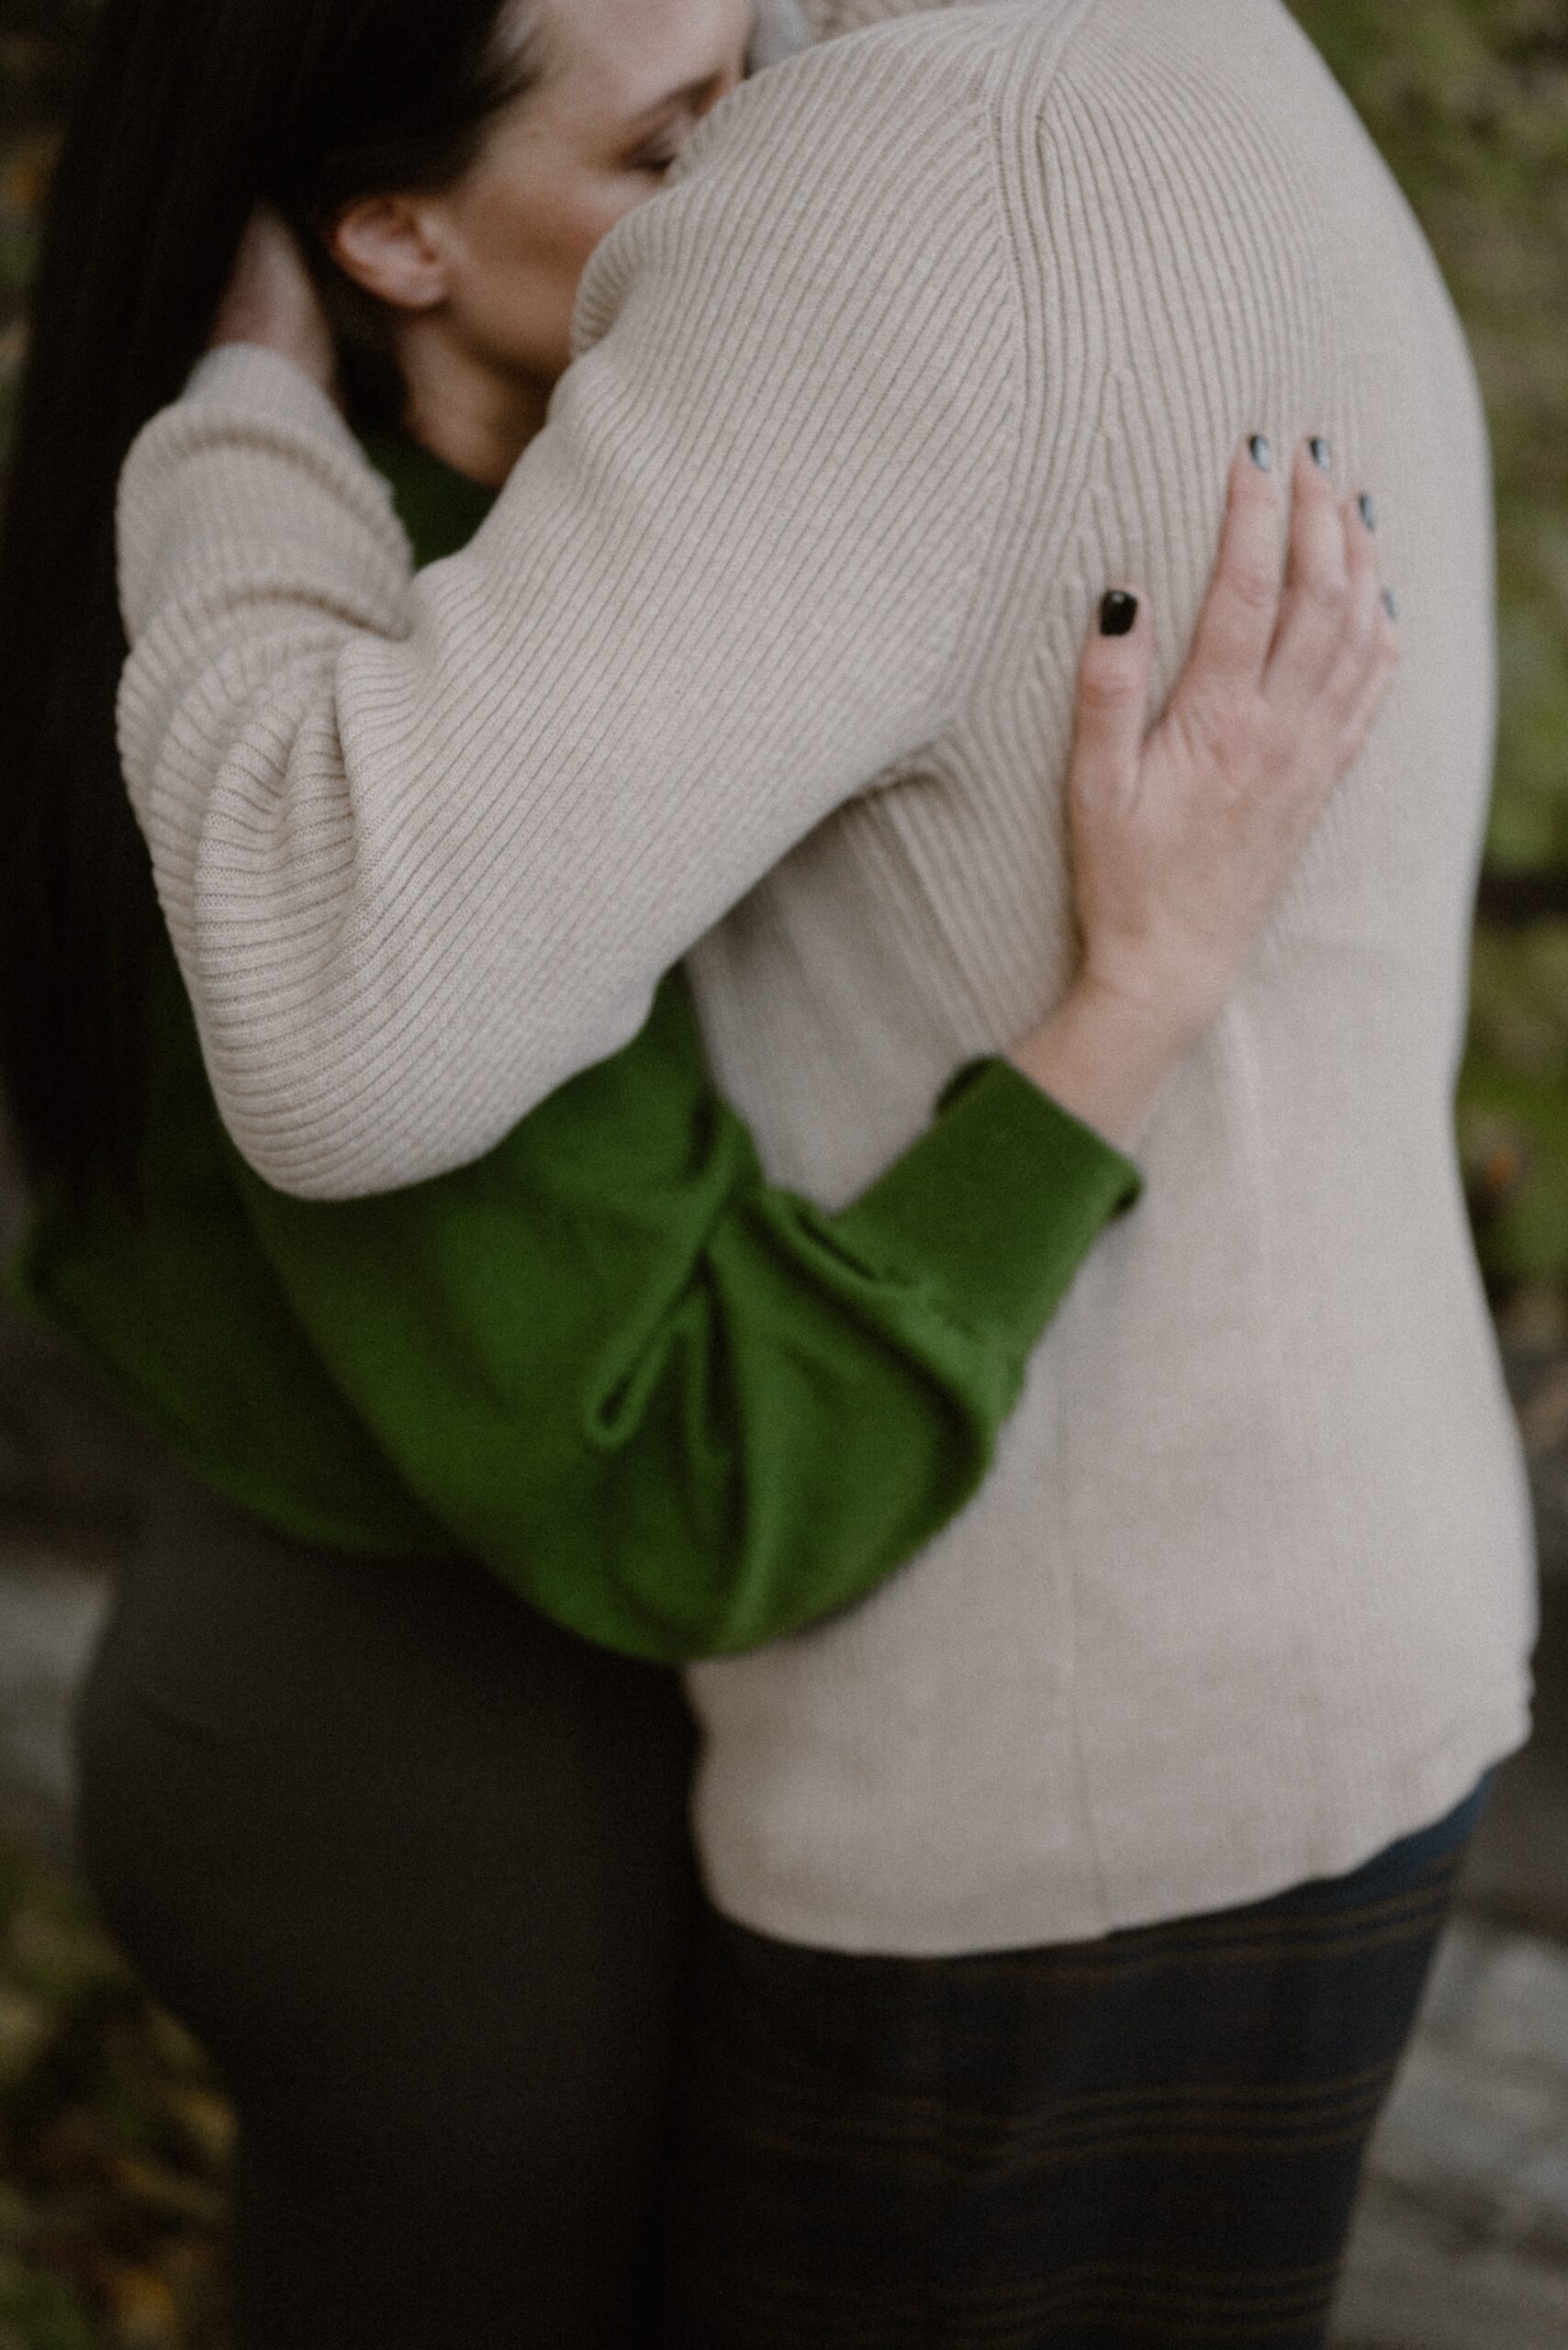 A color photo of an engaged couple intimate embracing one another for their Durango Colorado engagement session, taken by Colorado wedding photographer, Ashley Joyce.